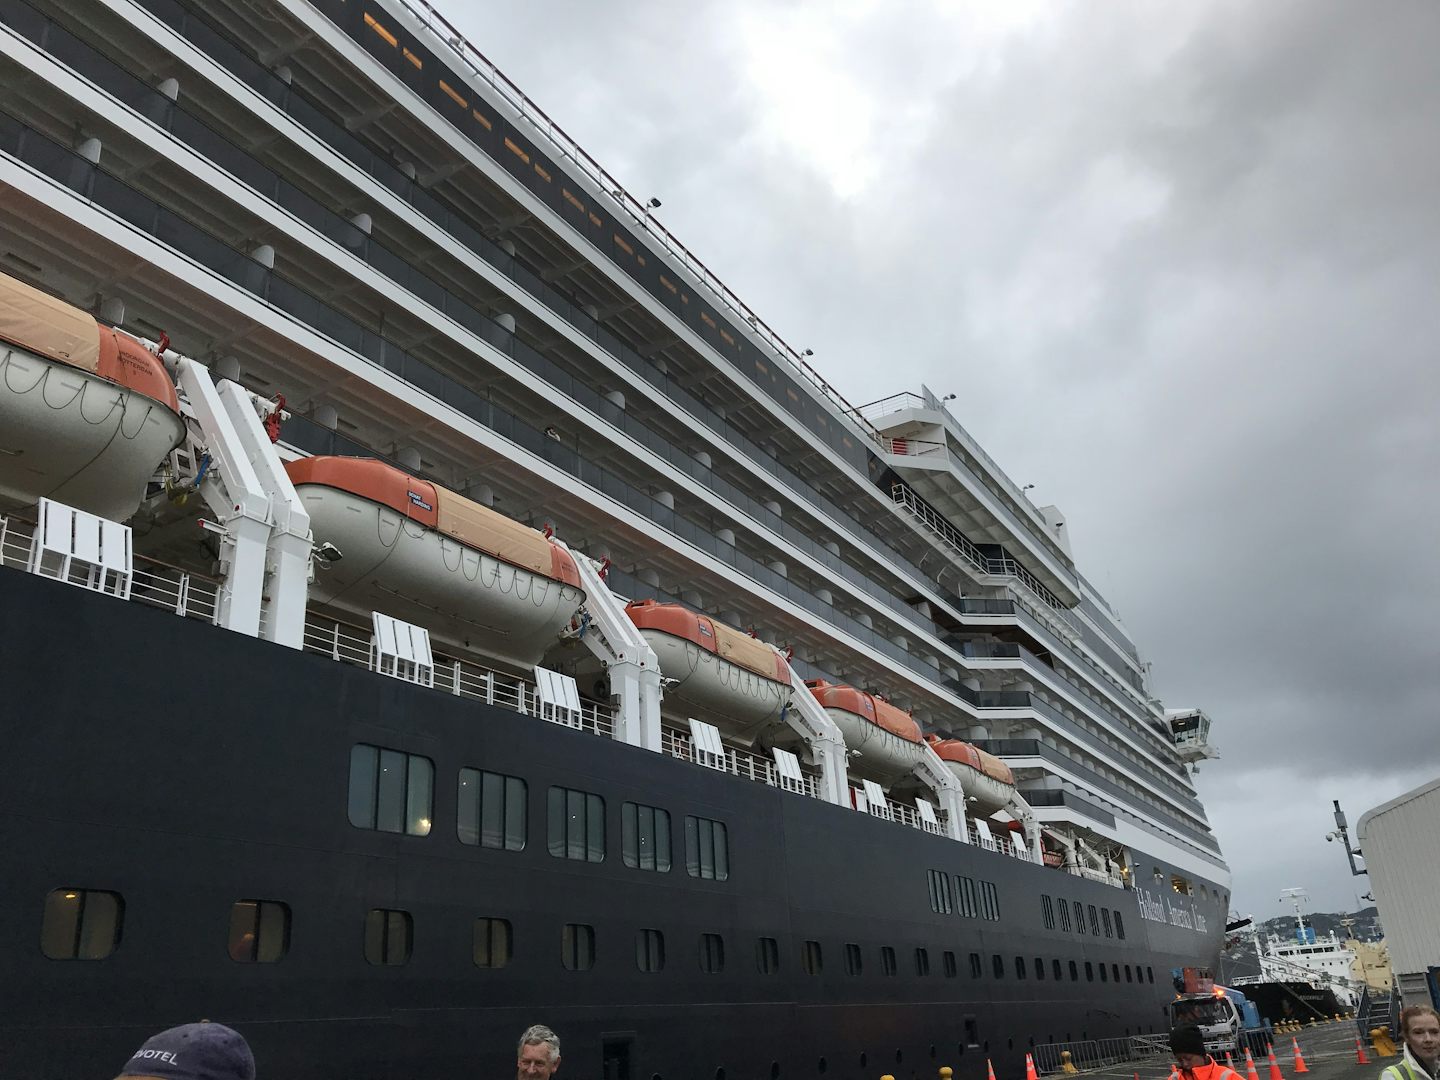 Worst experience- they need to take a refresher course on hospitality - not all bad much of the wait staff are polite but the cruise director would be better off working in a mortuary where his skills may be more adept . My recommendation is to pick another liner